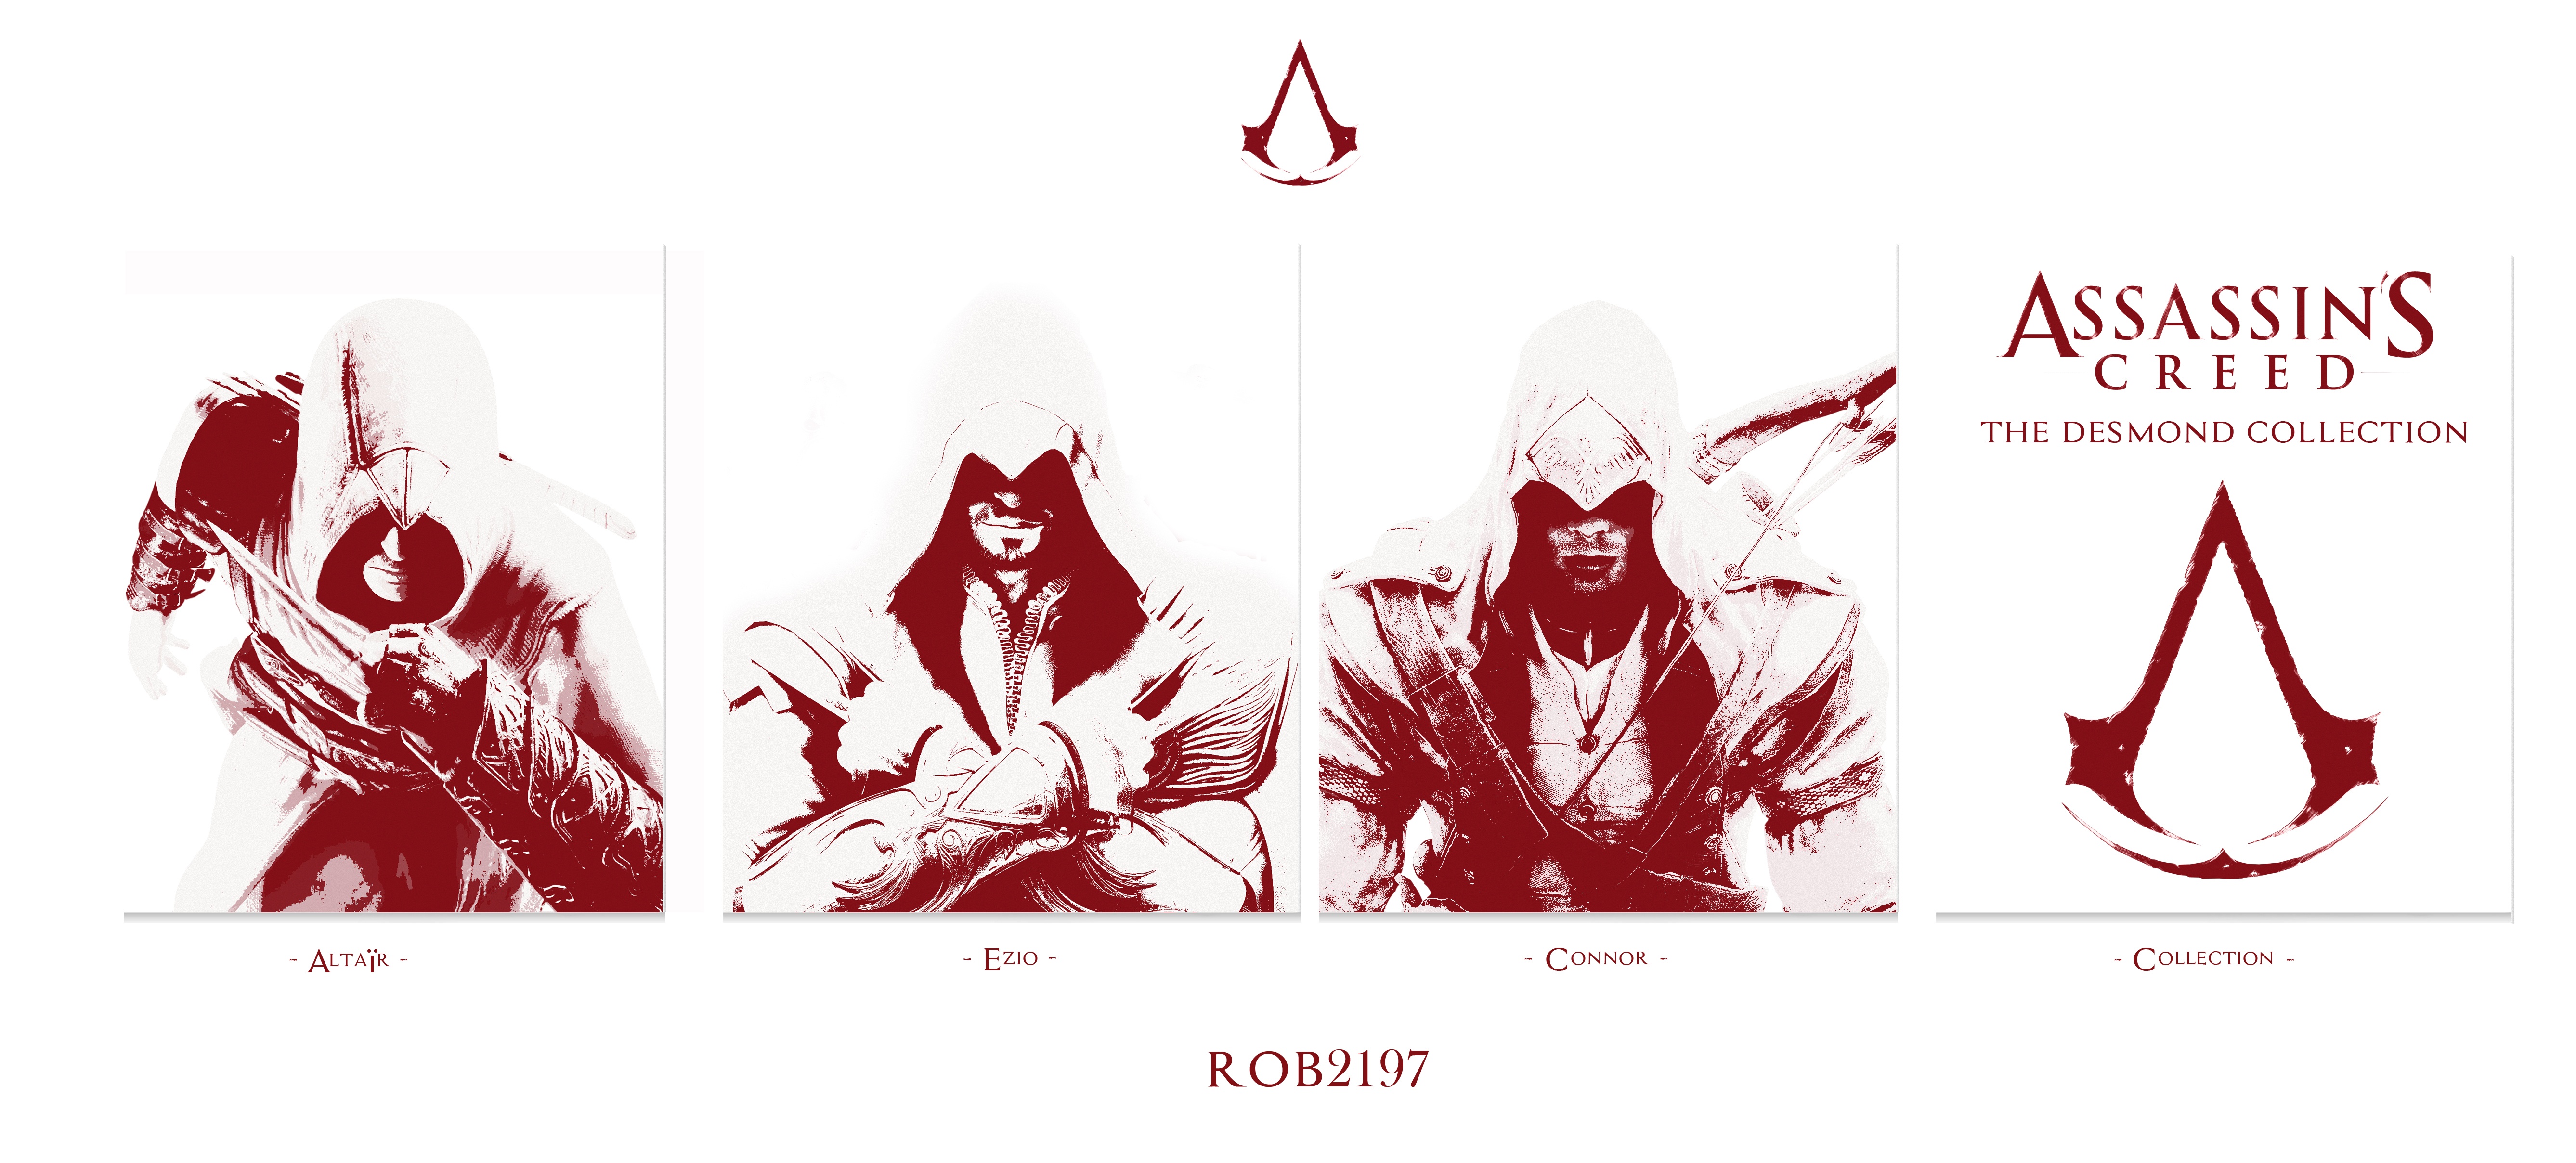 Assassin's Creed: The Desmond Collection box cover